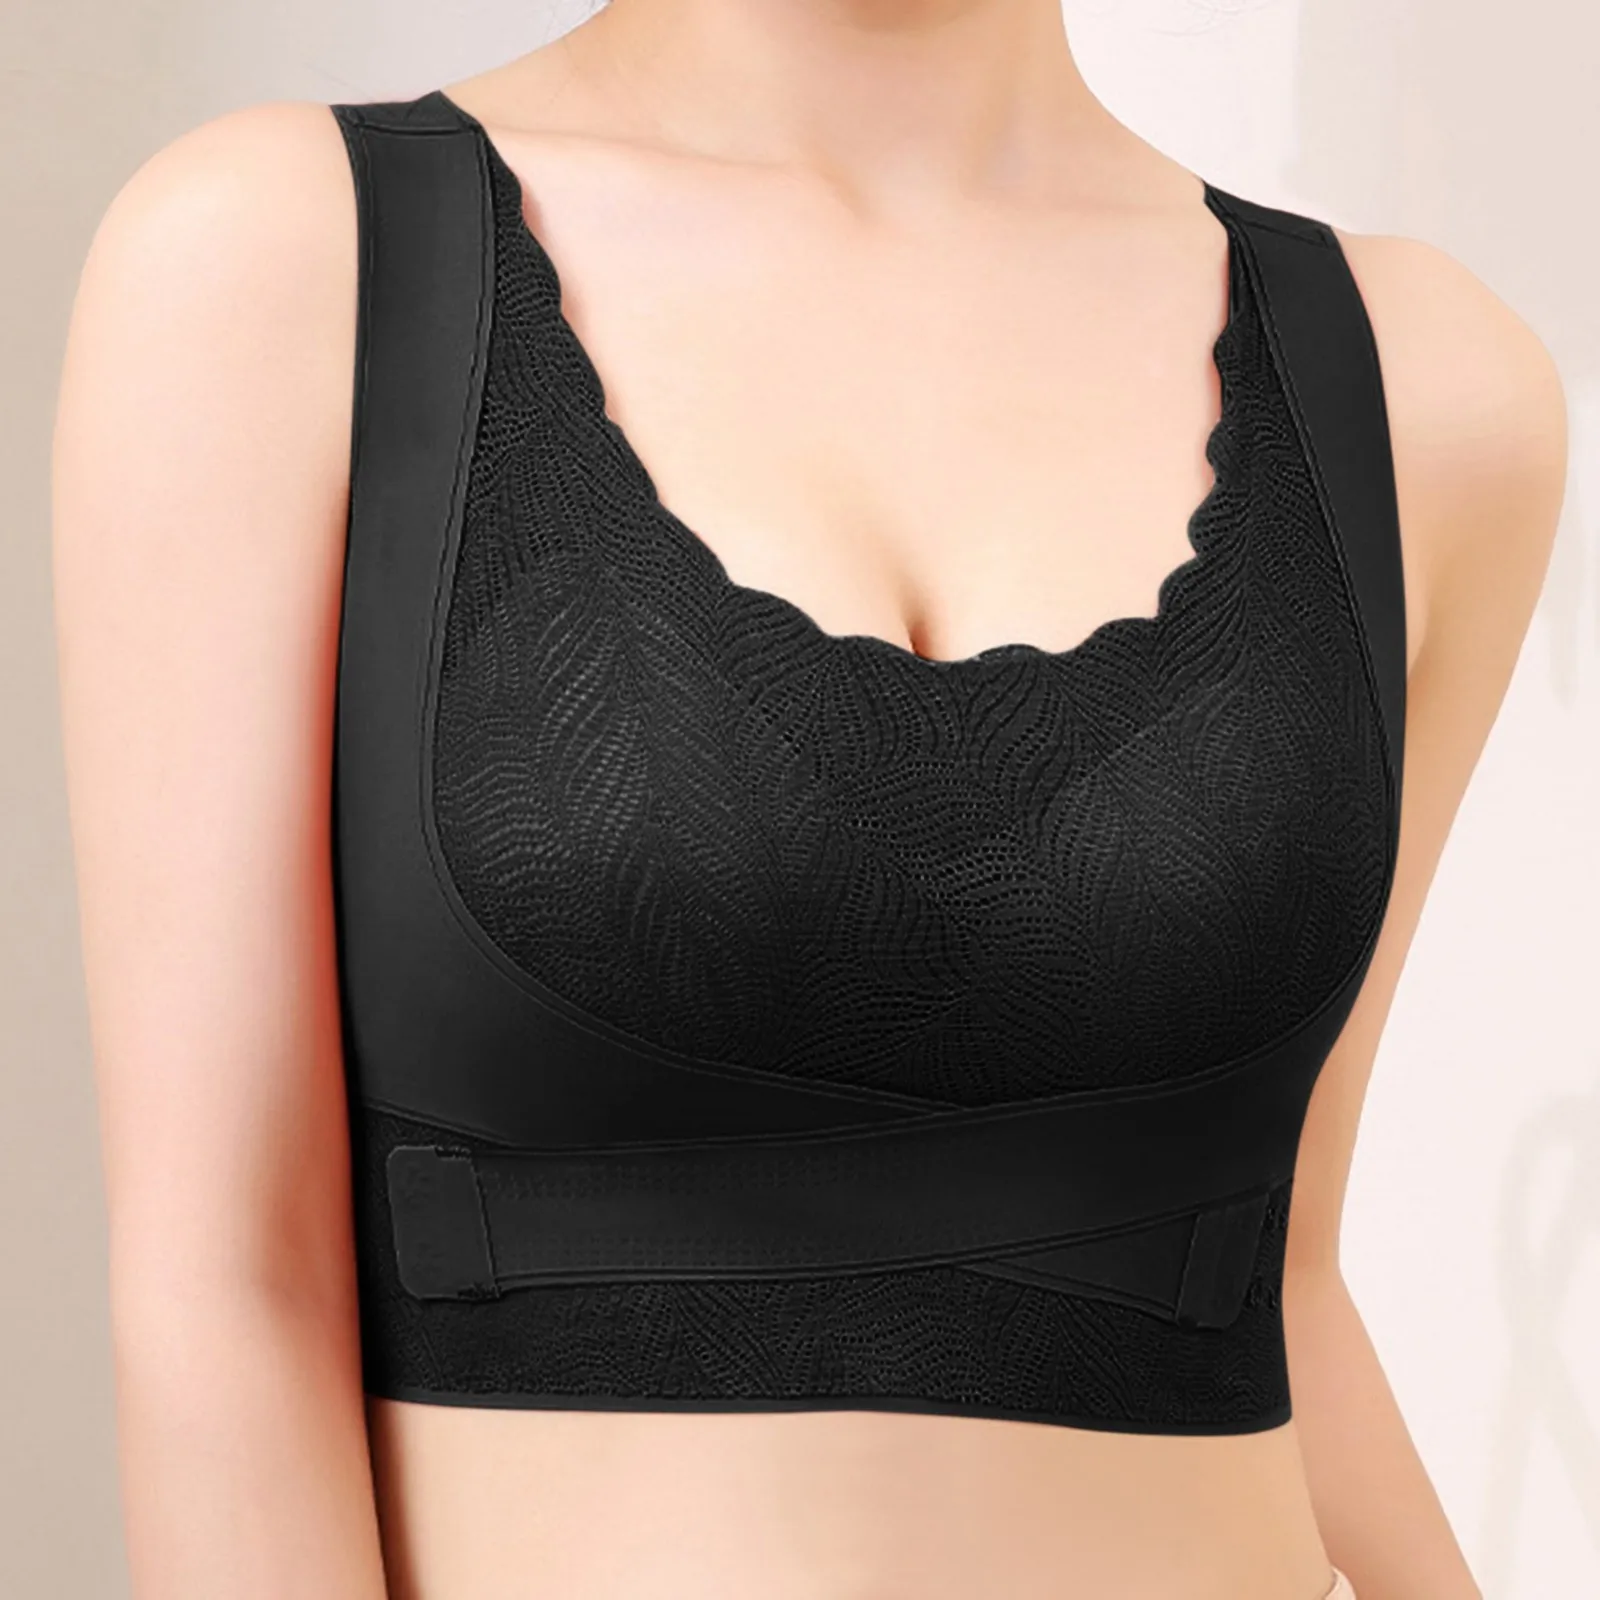 

Sexy Lace Sports Bra Womens Tank Top Shockproof Prevent Sagging Bralette Breast Push Up Breathable Brassiere Lingerie Intimates